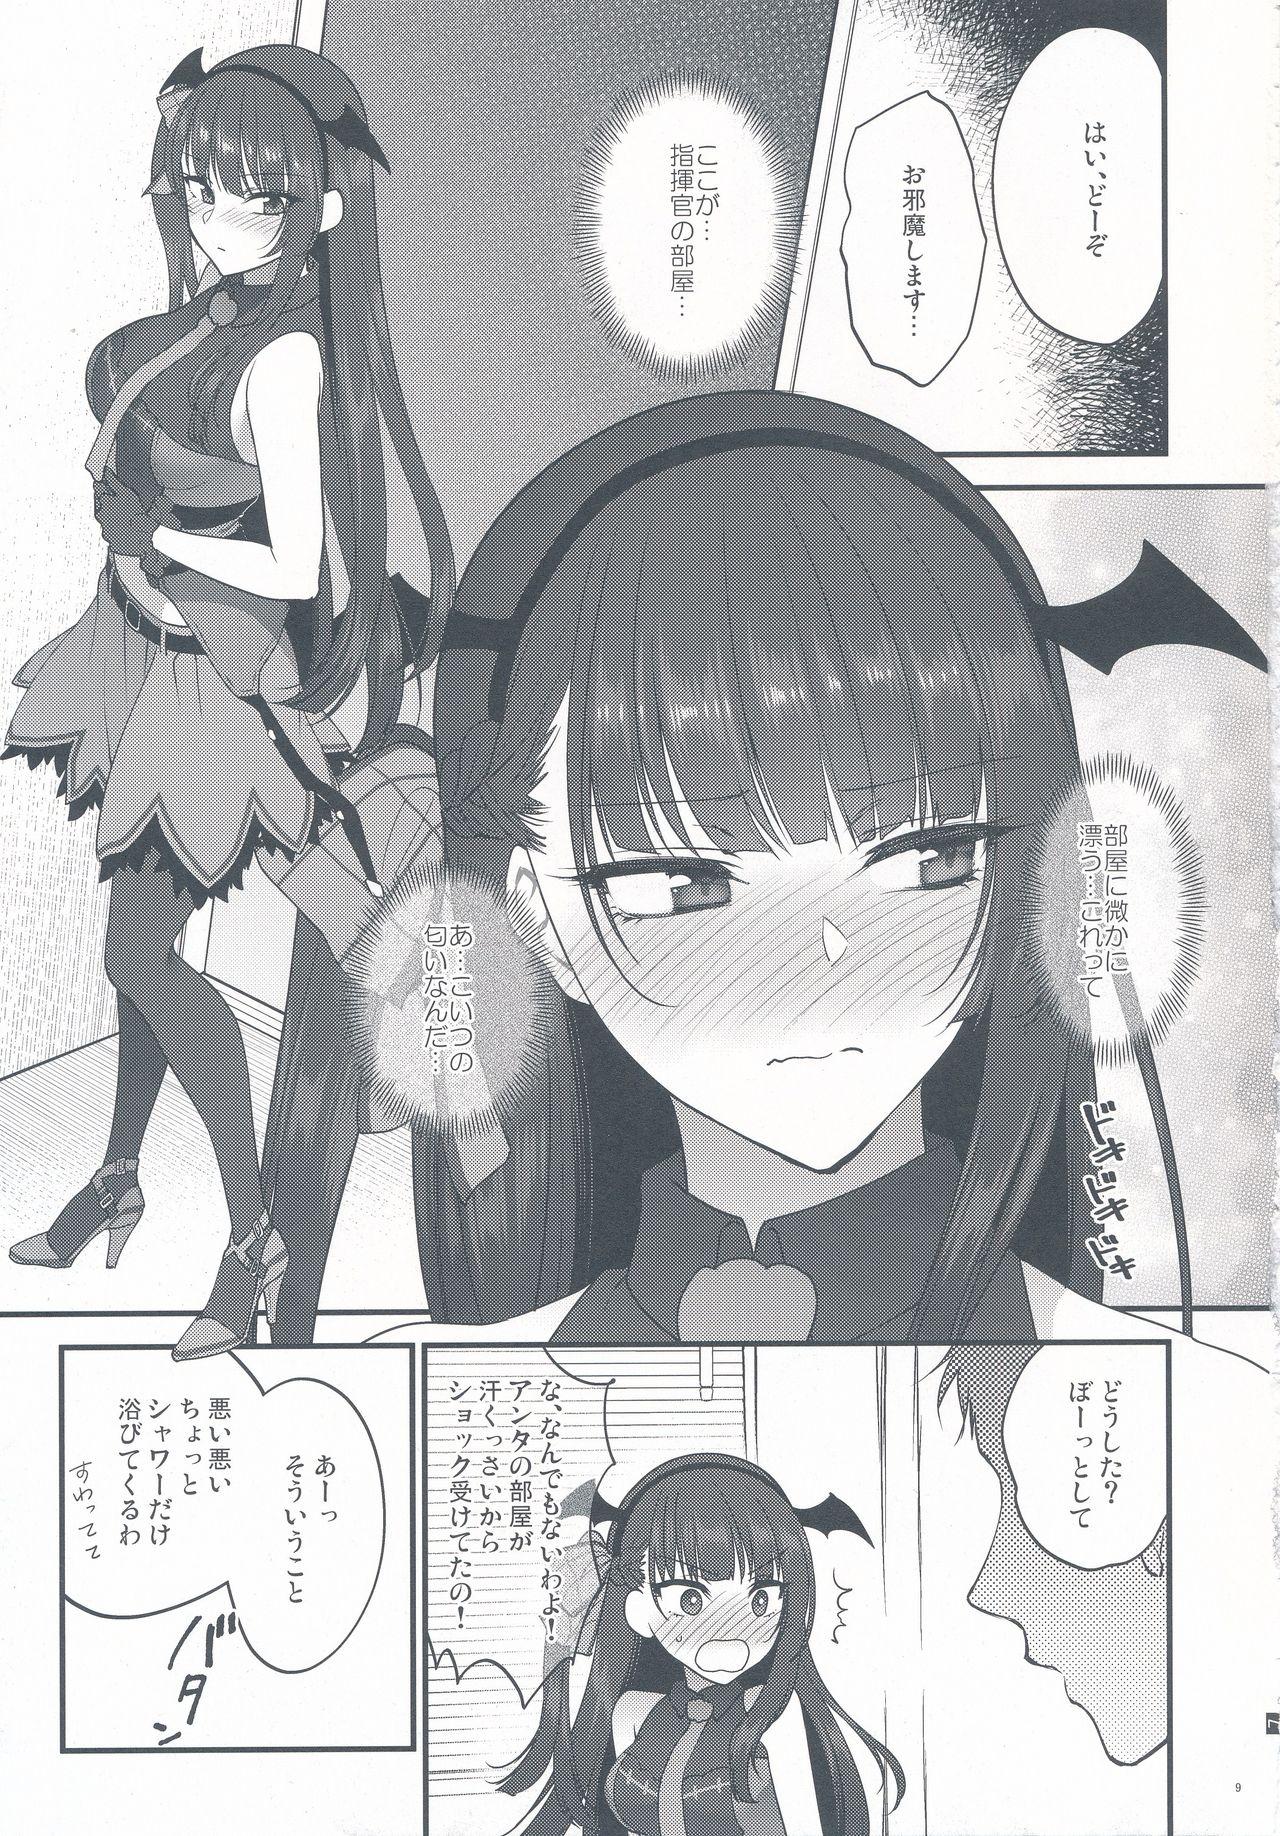 Tiny Obake nante Inai! - Girls frontline Doggy Style - Page 9